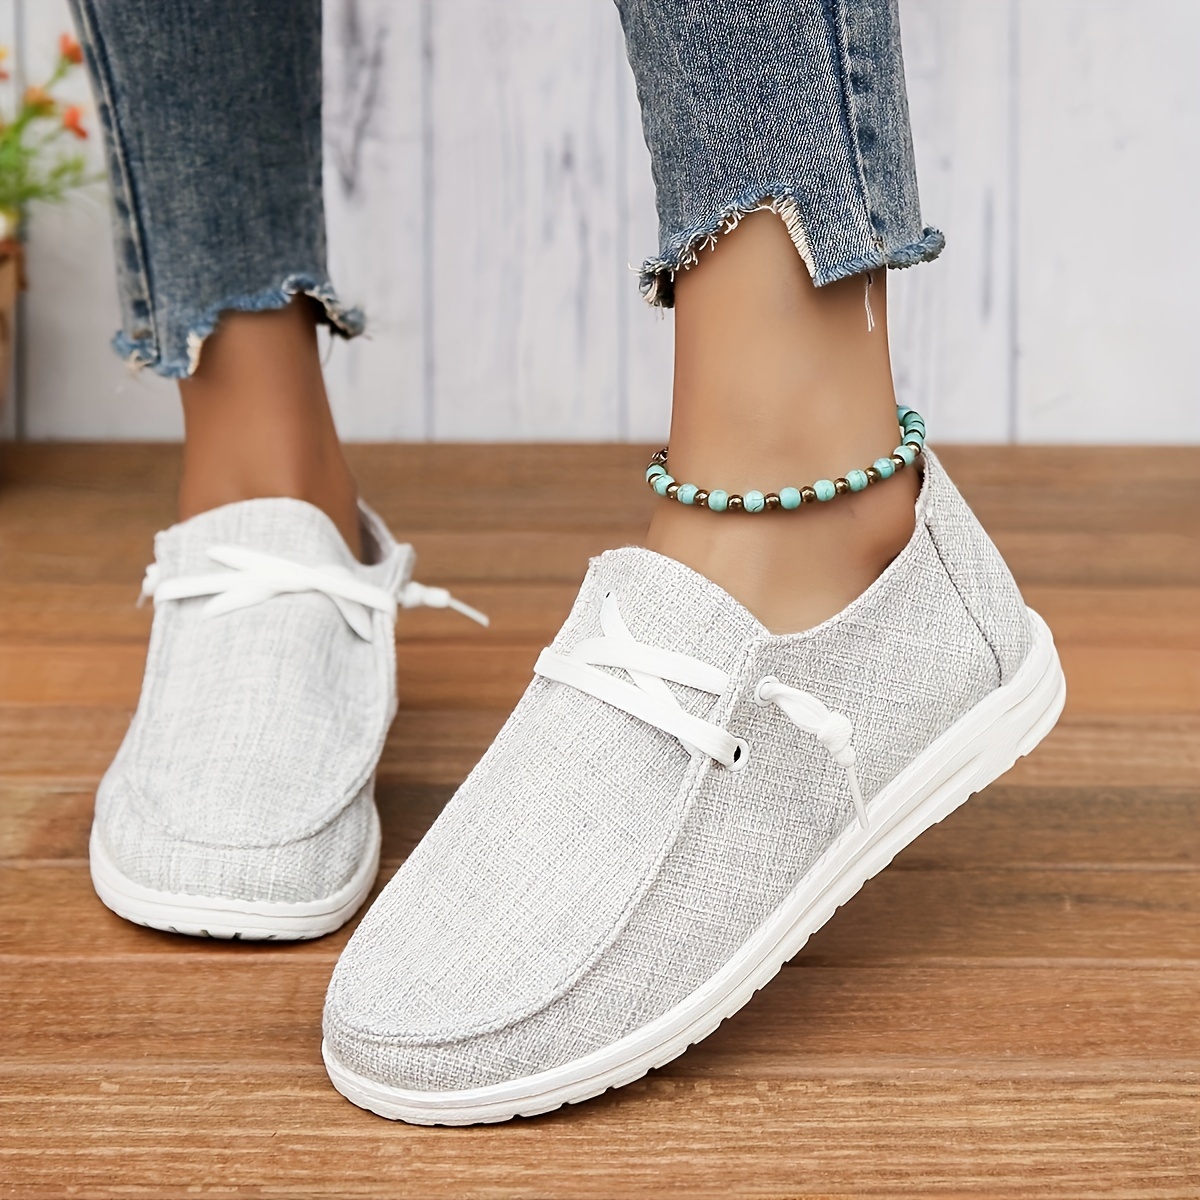 

Women's Casual Canvas Shoes, Round Toe Low Top Flat Shoes, Lightweight Walking Sneakers